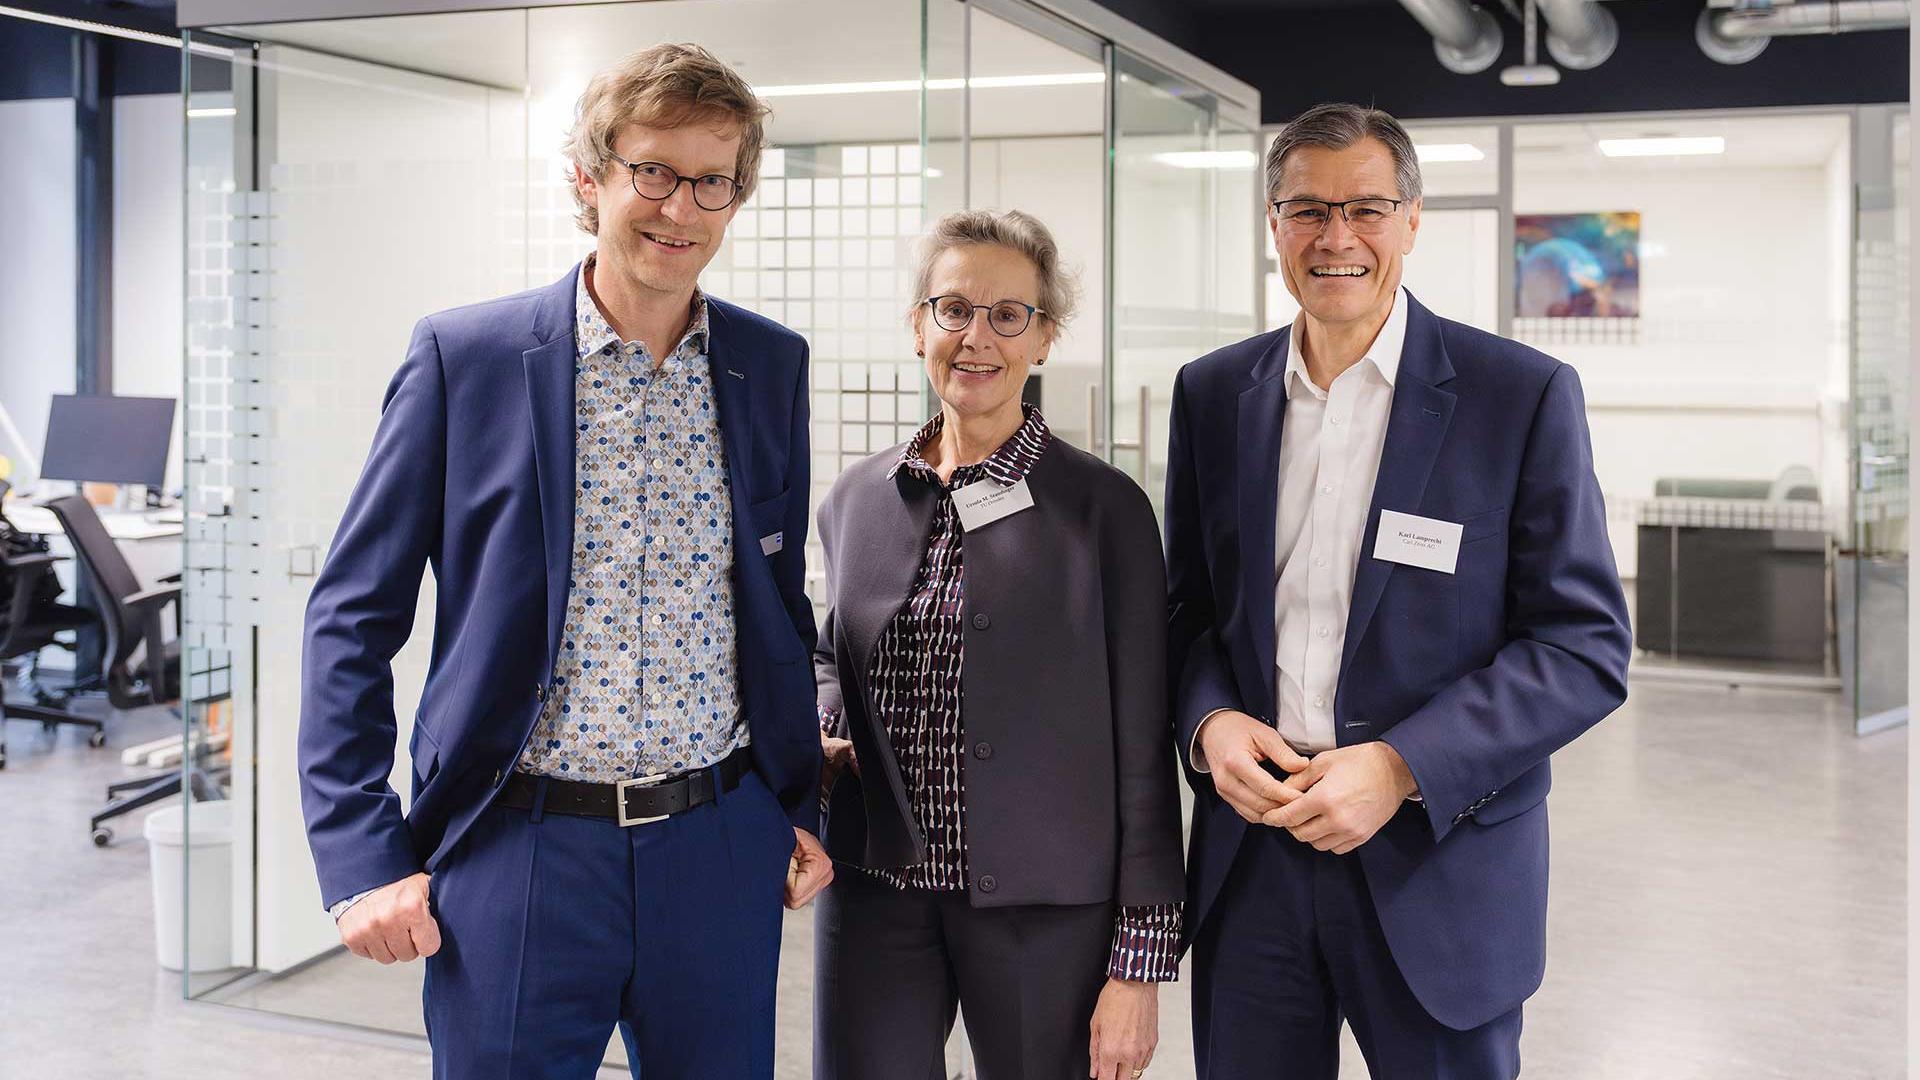 Dr. Kai Wicker, Head of the ZEISS Innovation Hub Dresden, Prof. Dr. Ursula M. Staudinger, Rector of the Technical University of Dresden, and Dr. Karl Lamprecht, President and CEO of ZEISS, (from left to right) at the opening ceremony for the new premises of the ZEISS Innovation Hub Dresden.